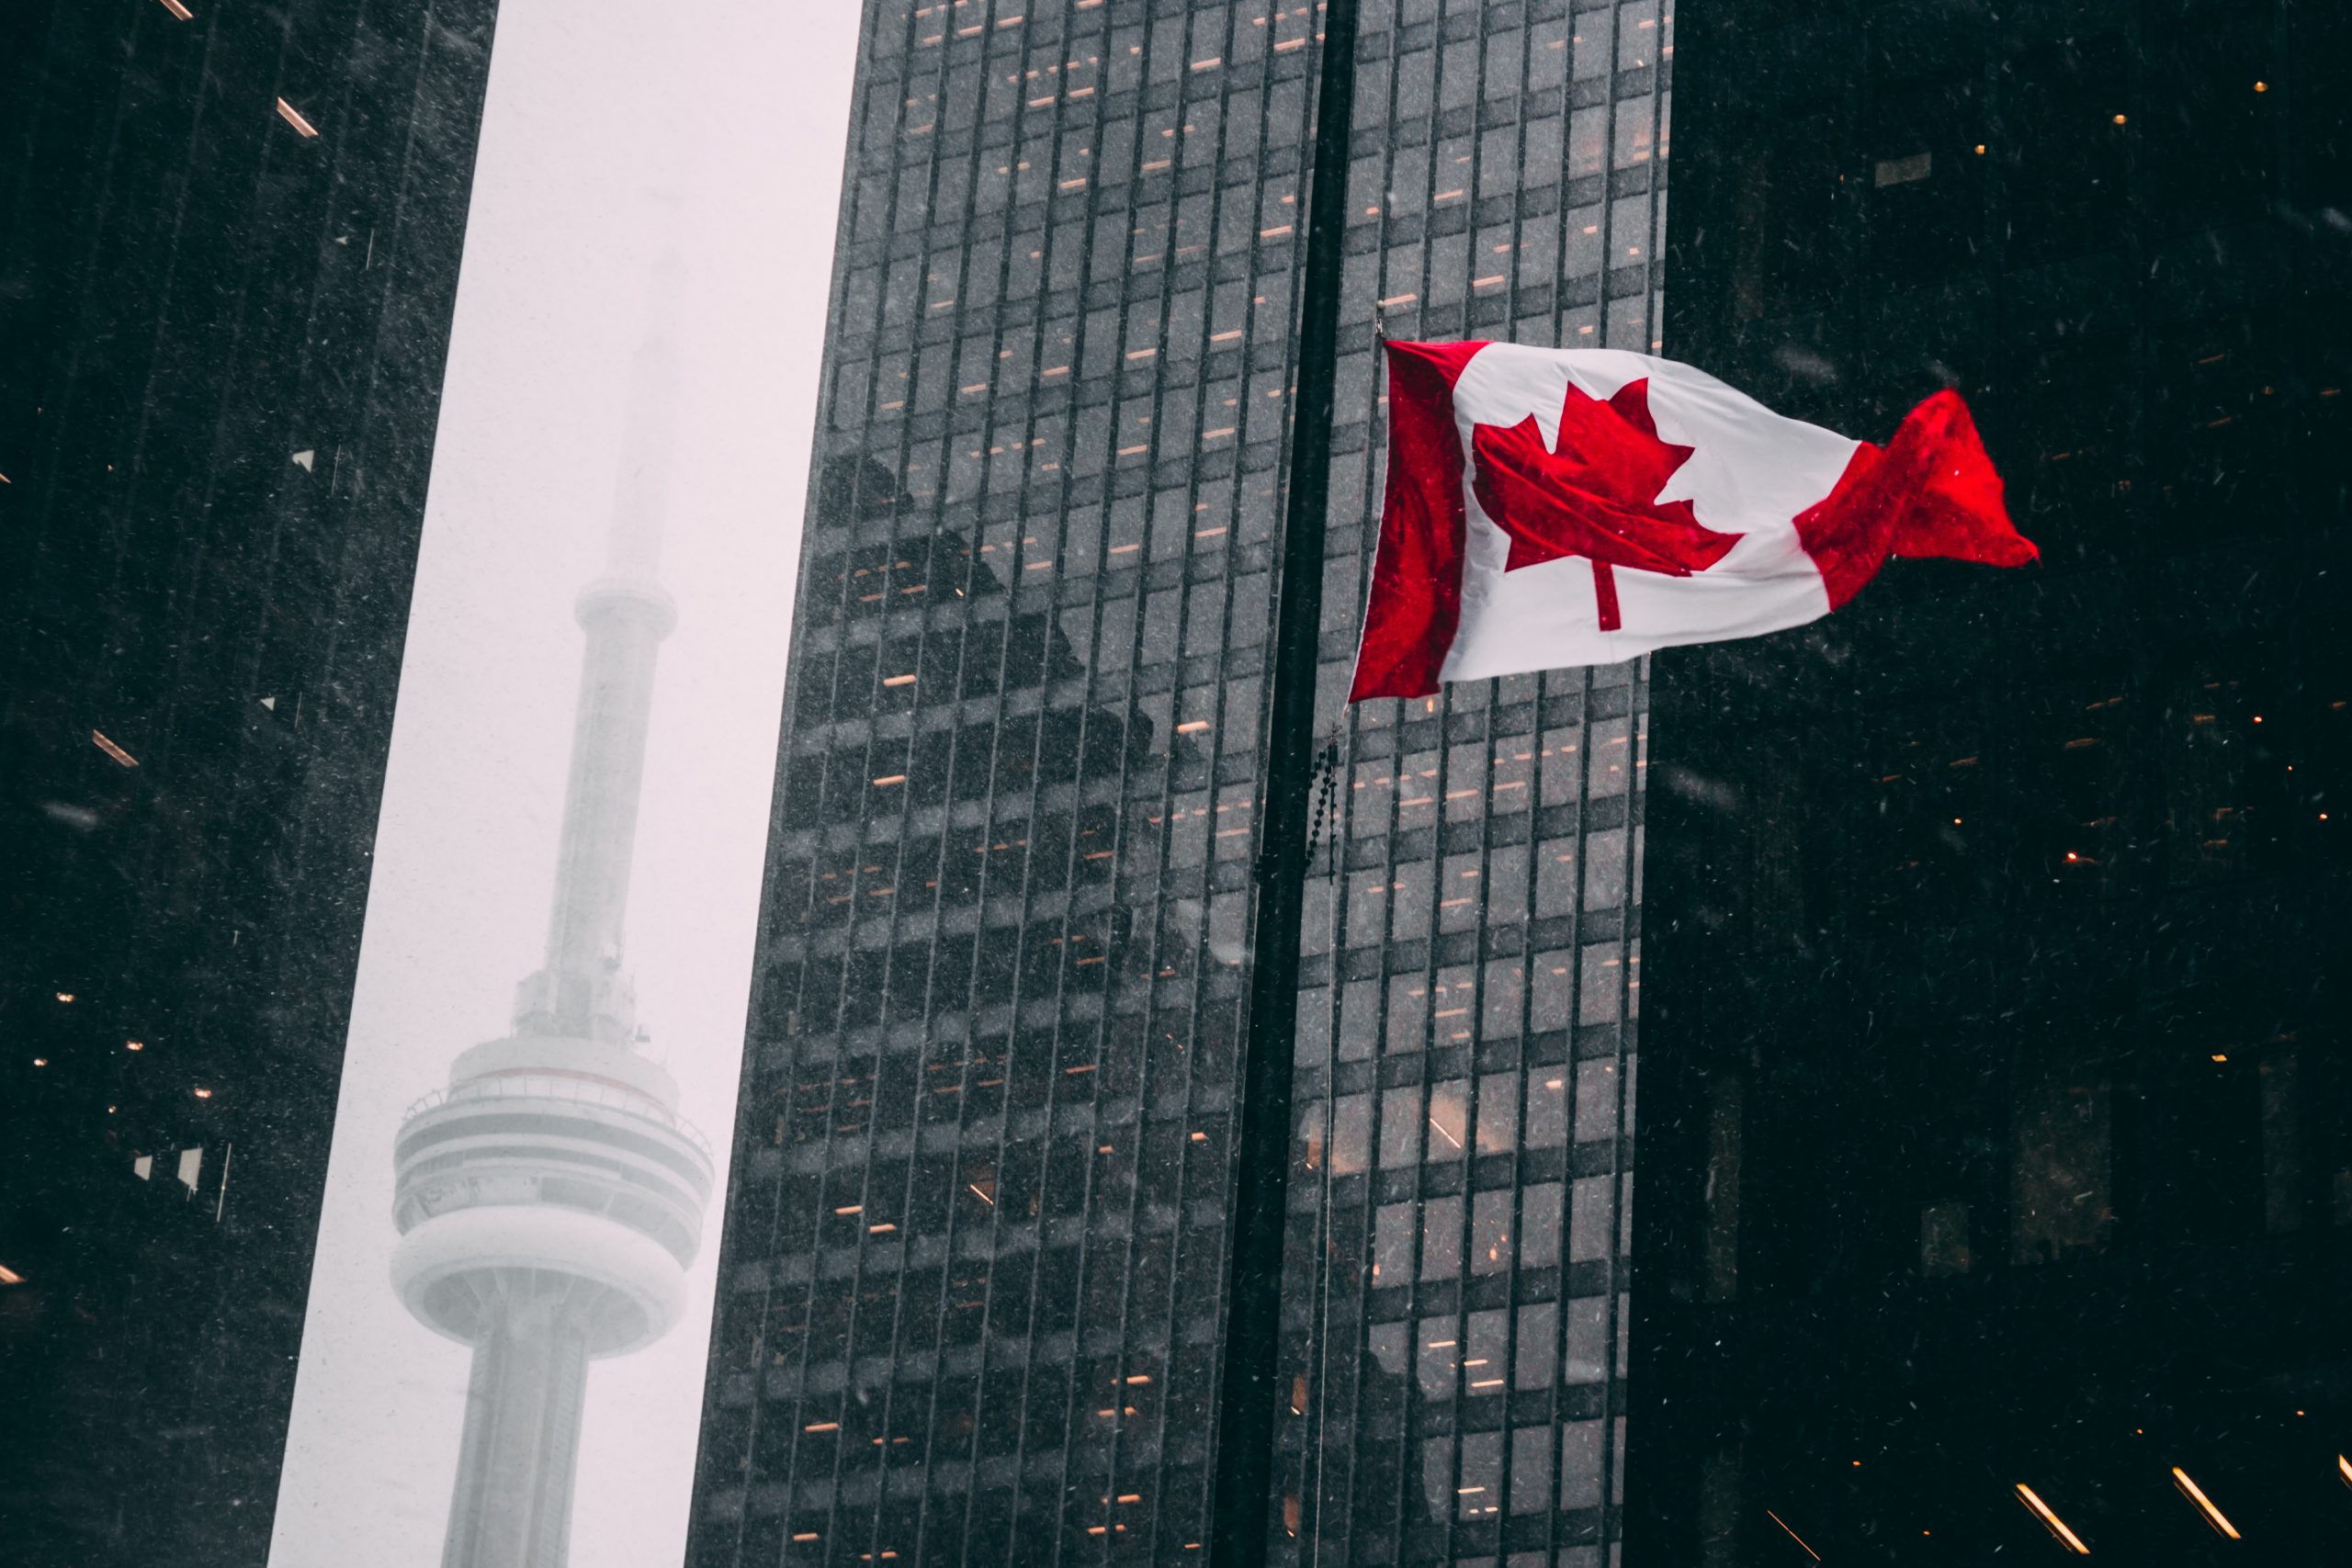 Dramatic photo of the Canadian flag and CN Tower from the financial district in Toronto